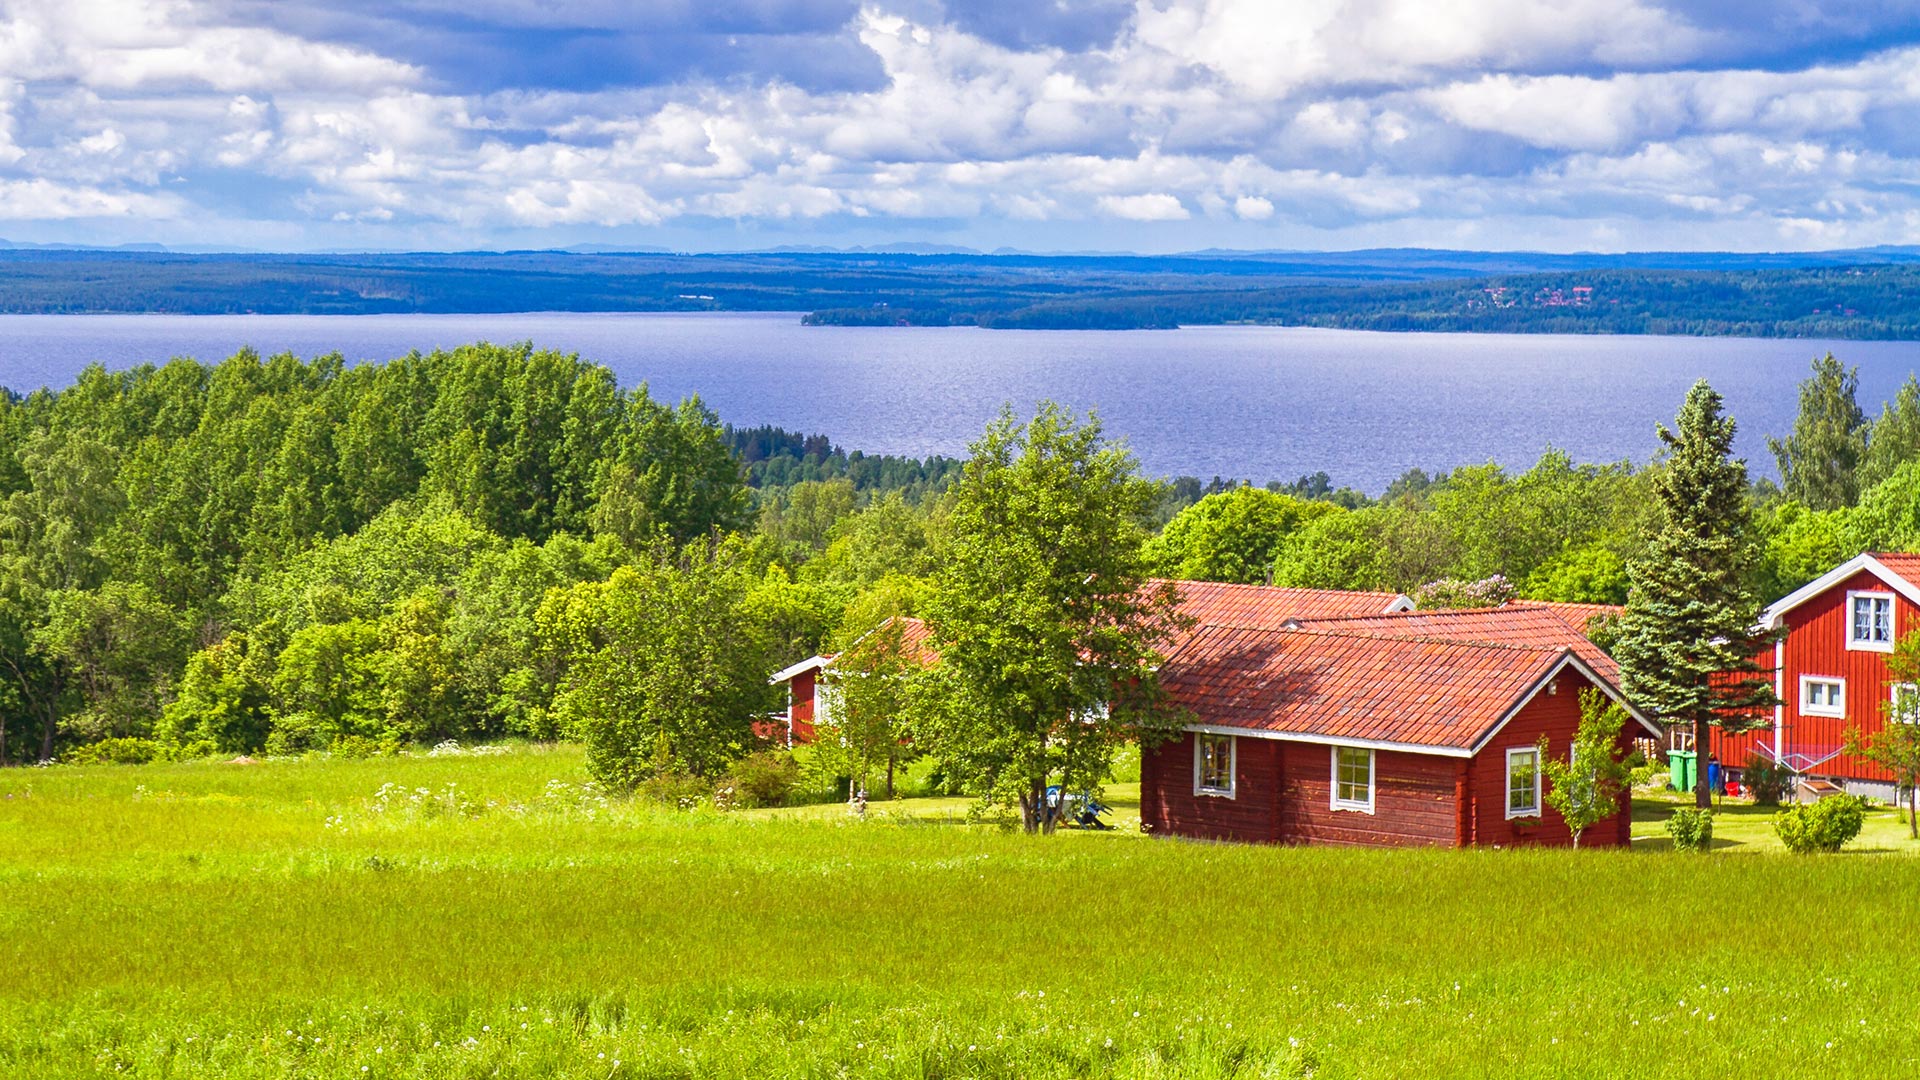 Countryside & Natural Scenery in Sweden : Nature Tours & Travel ...